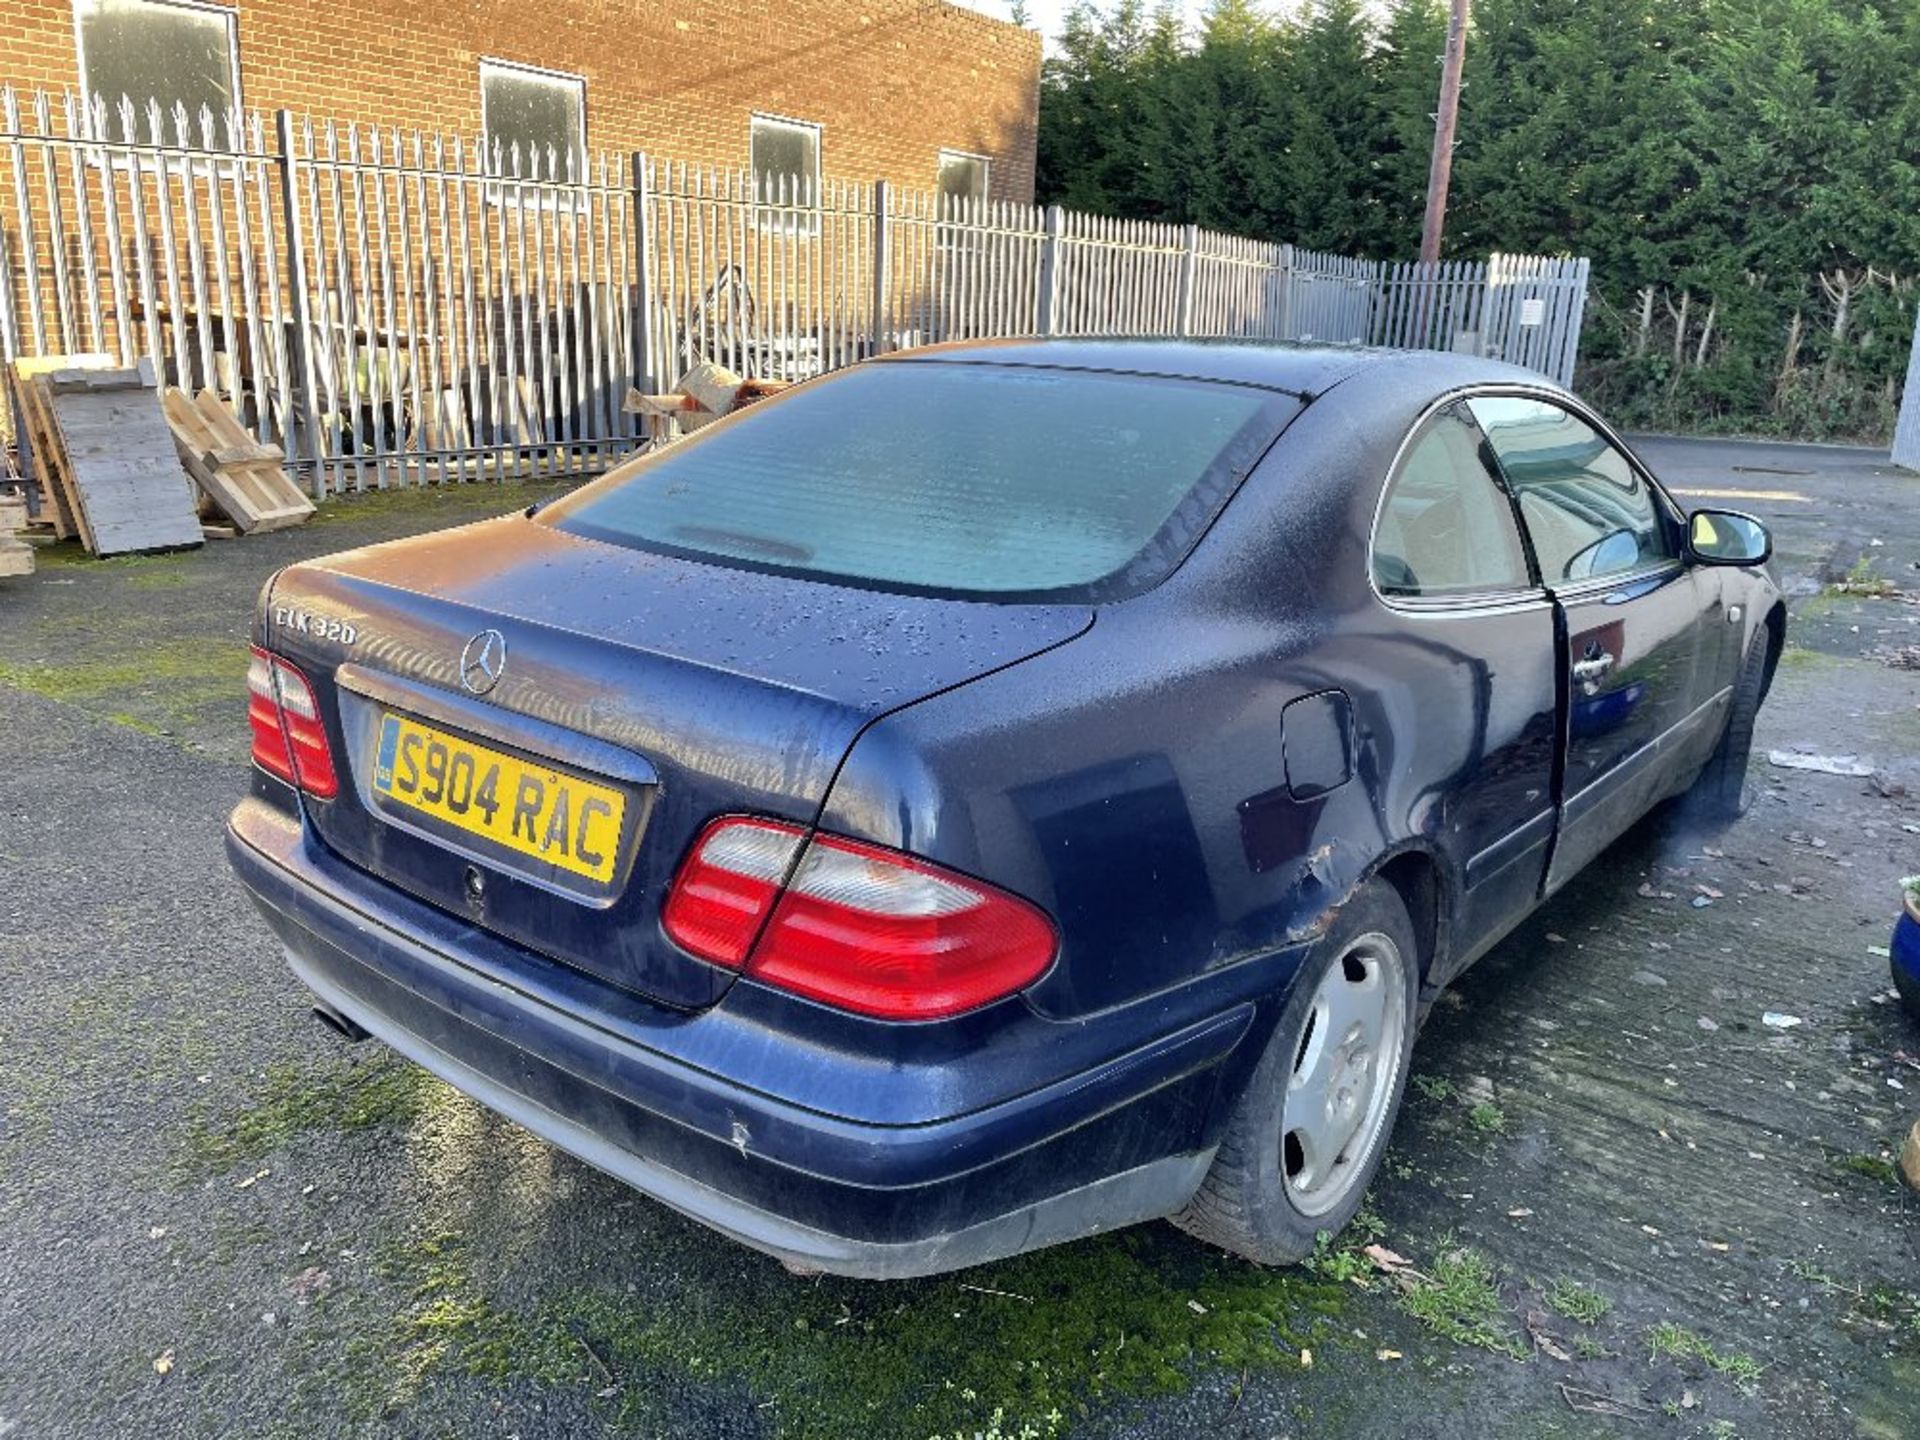 Mercedes CLK 320 Elegance Auto Petrol Coupe | S904 RAC | Advised to be SCRAP condition - Image 8 of 8